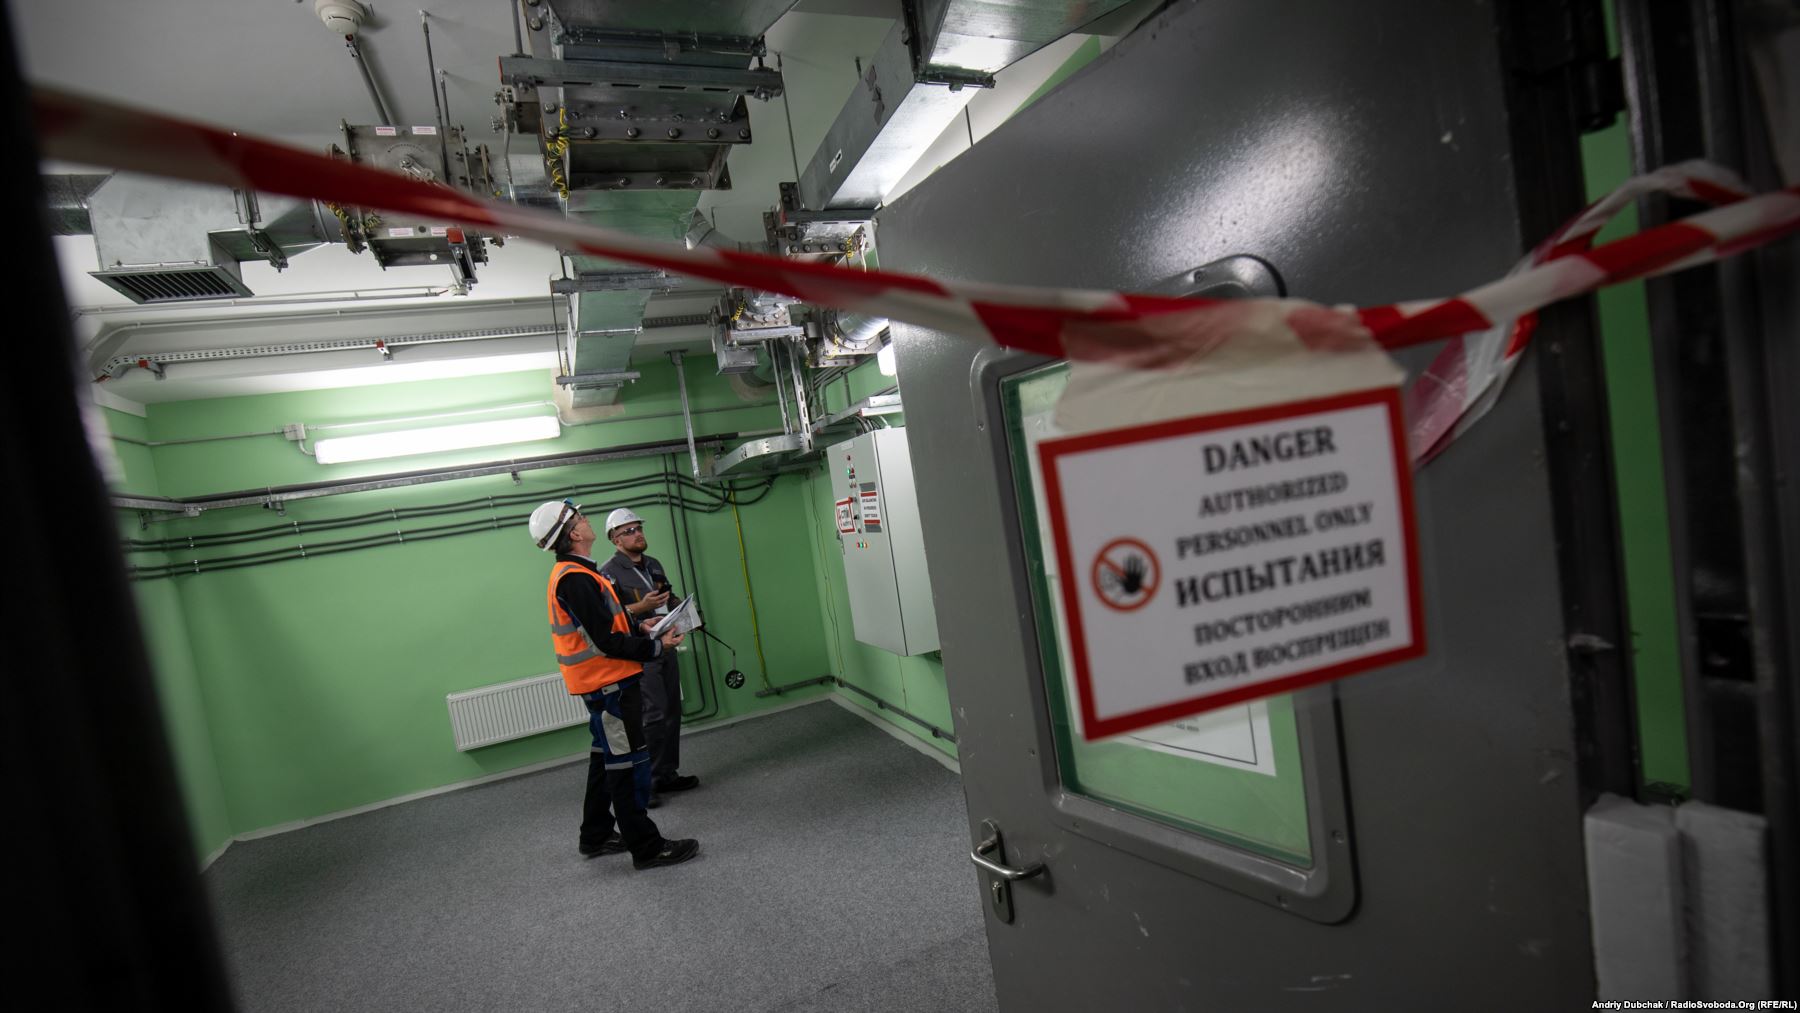 Workers at Chernobyl's New Safe Confinement (NSC) inspect new equipment. Two years after the structure was put into position, containment systems are still being installed and tested. The cost of the shield was almost $1.6 billion, with funding coming from the European Bank for Reconstruction and Development. Photo by: Andriy Dubchak